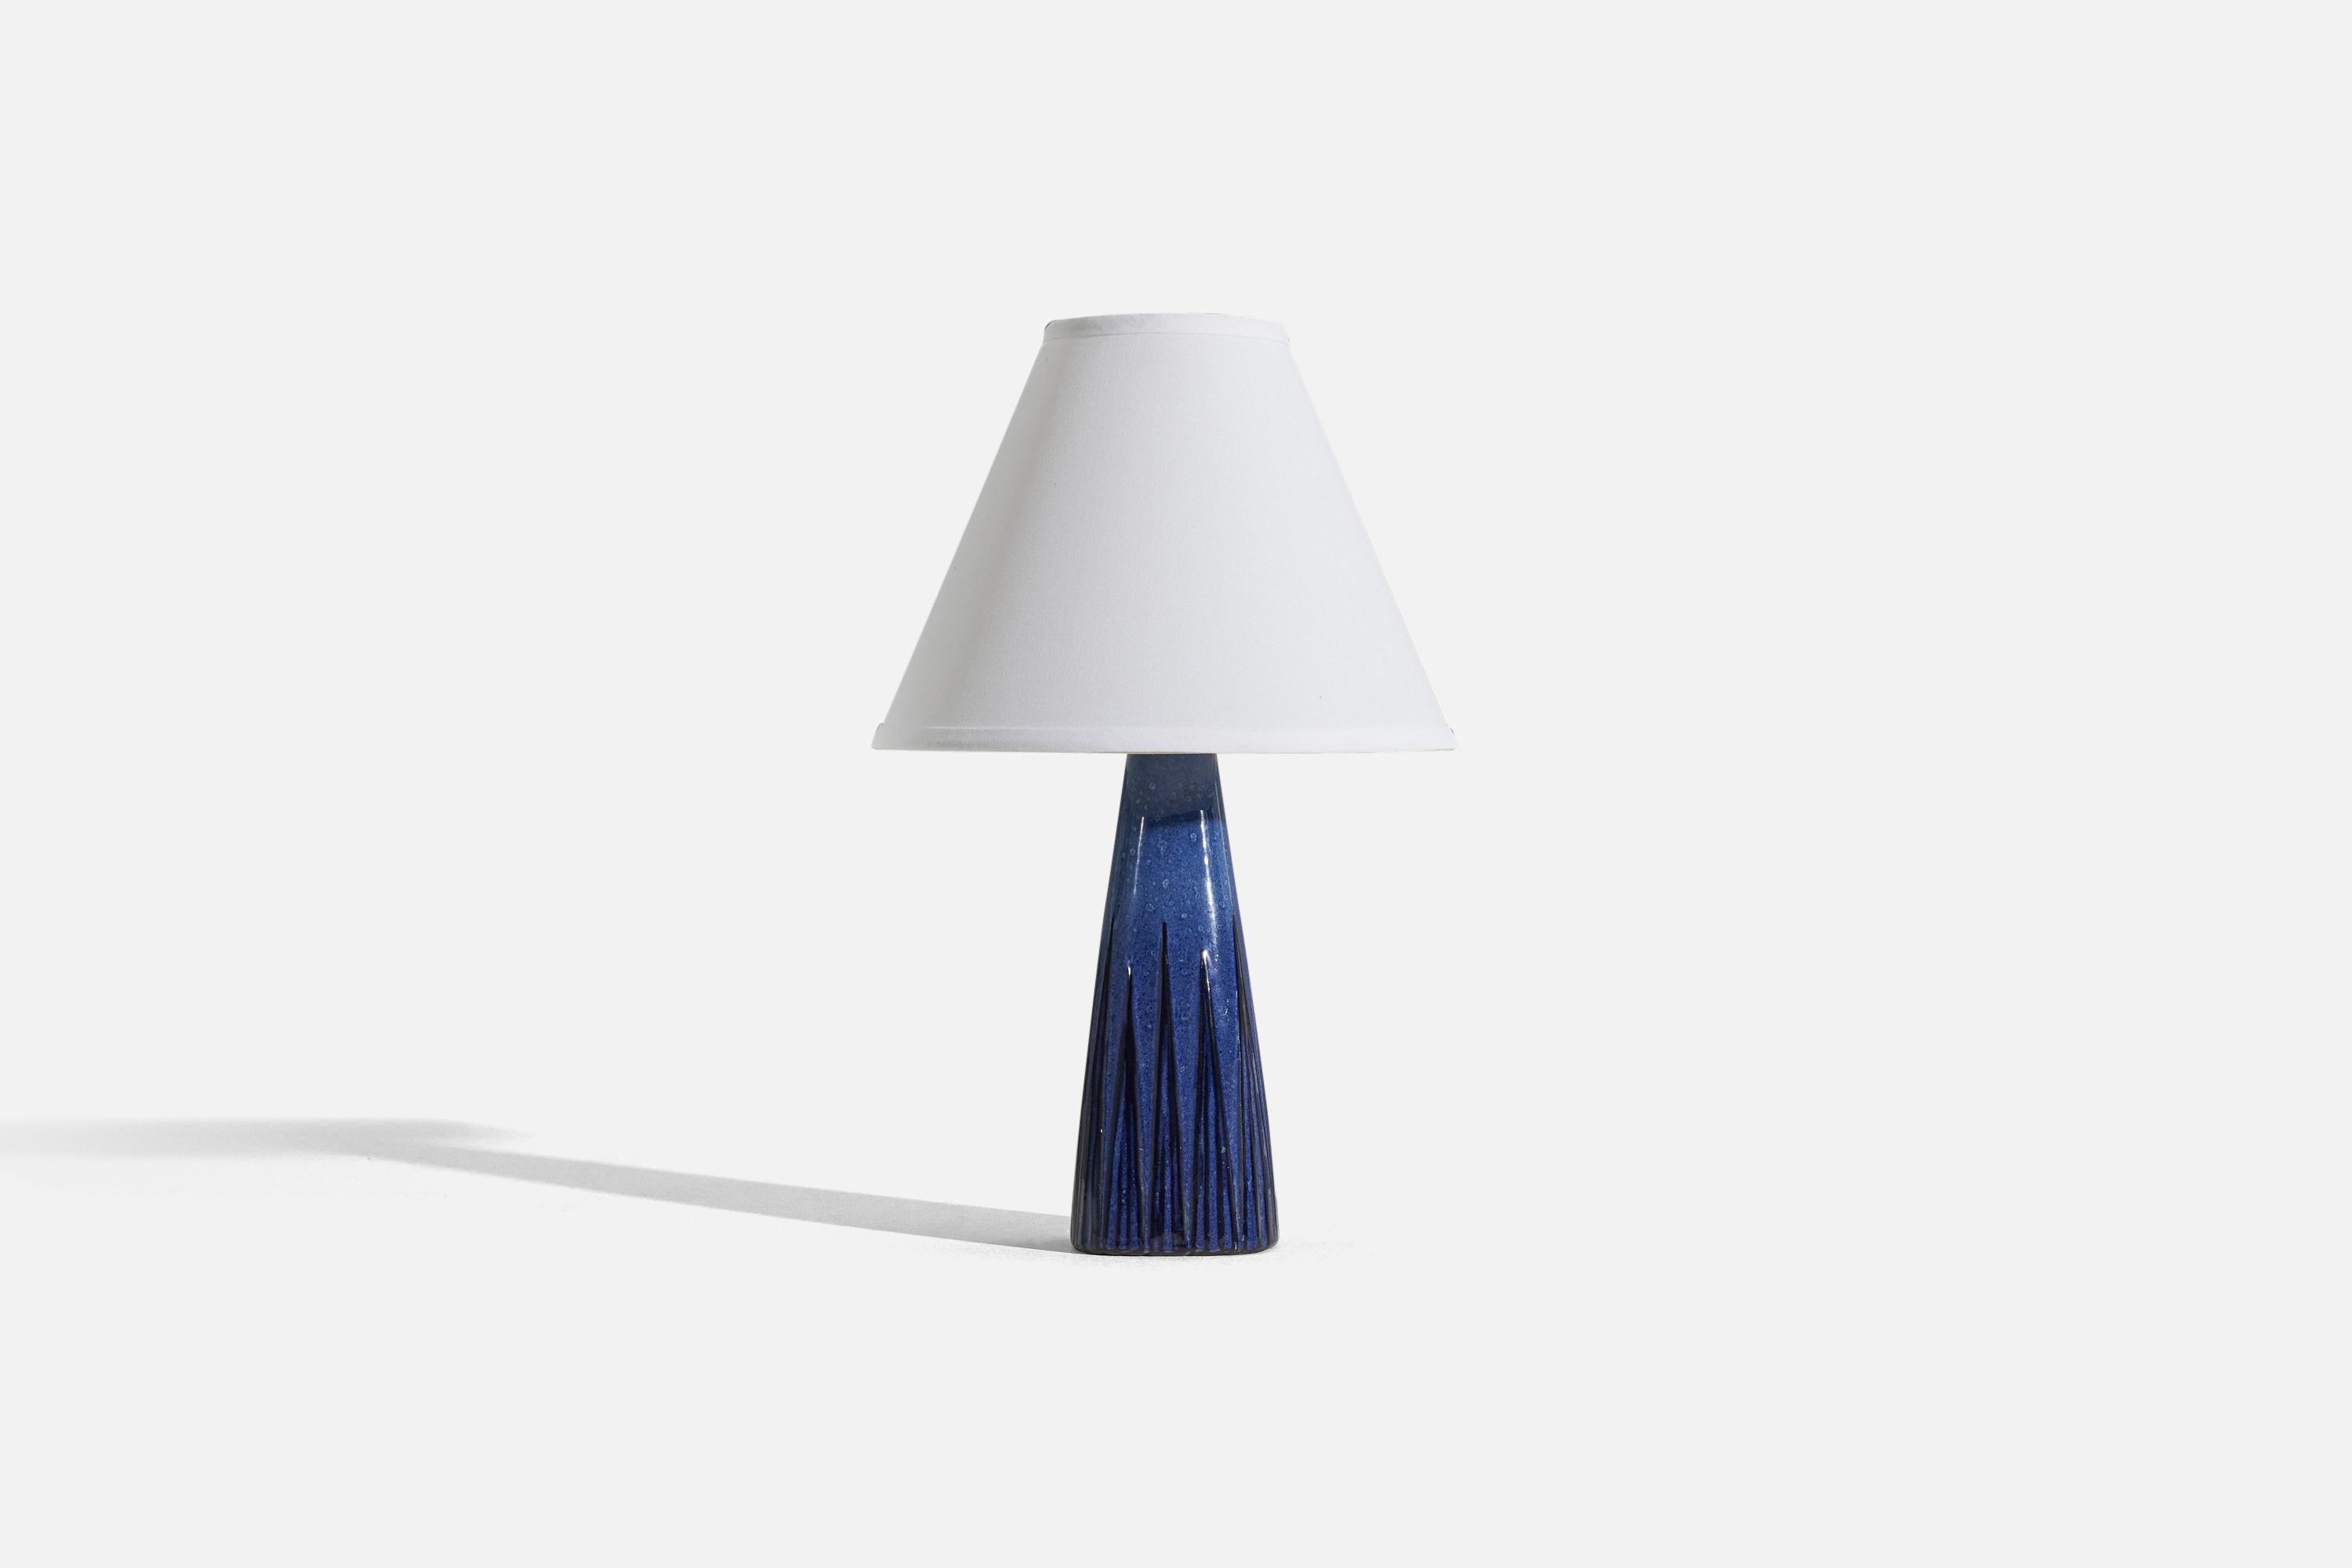 A blue, glazed stoneware table lamp, designed and produced by a Swedish designer, Sweden, 1960s.

Sold without lampshade. 
Dimensions of Lamp (inches) : 12.18 75 x 3.375 x 3.375 (H x W x D)
Dimensions of Shade (inches) : 4.25 x 10.25 x 8 (T x B